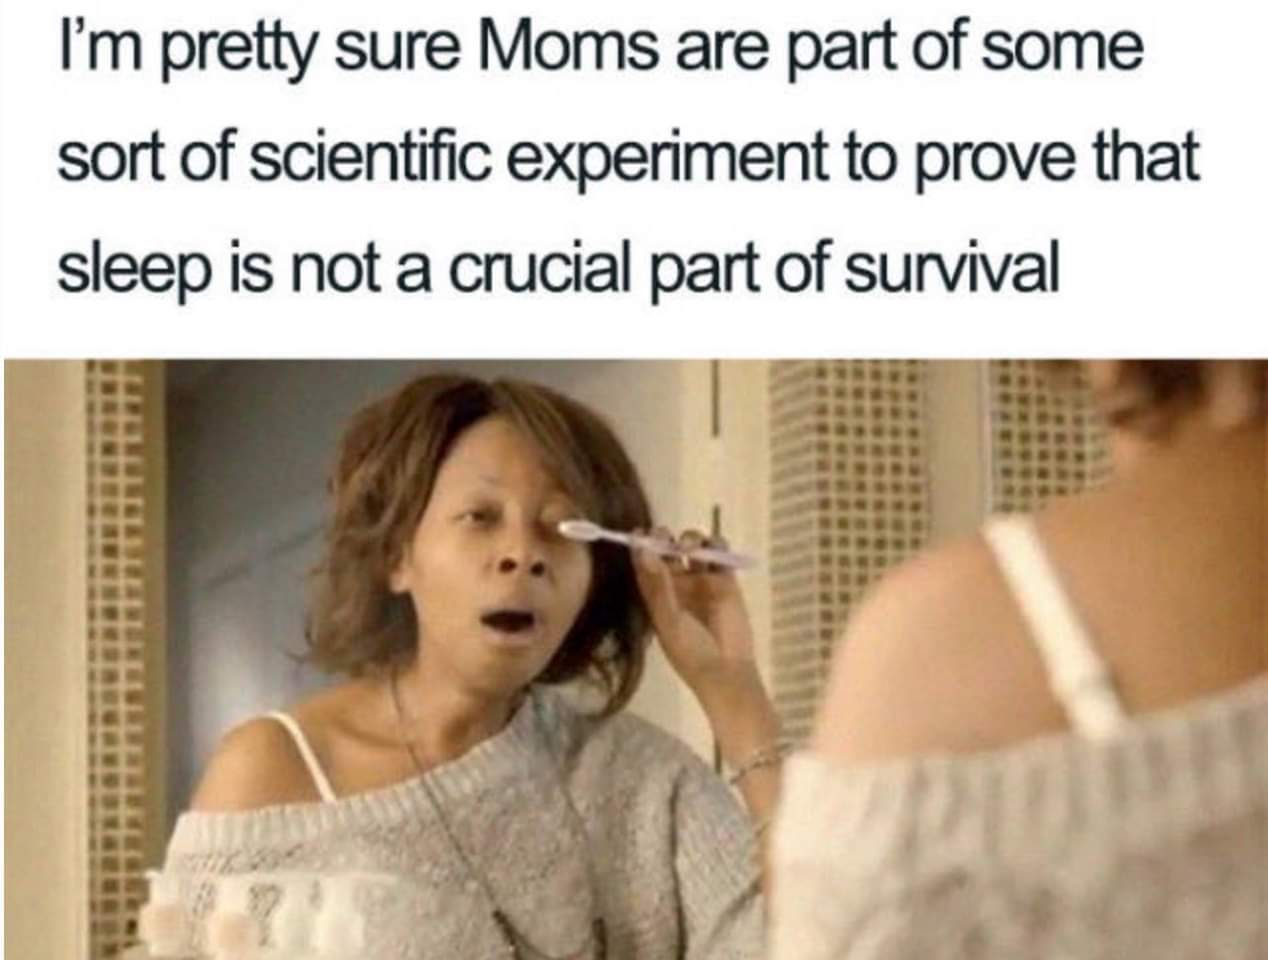 funny mom memes - I'm pretty sure Moms are part of some sort of scientific experiment to prove that sleep is not a crucial part of survival